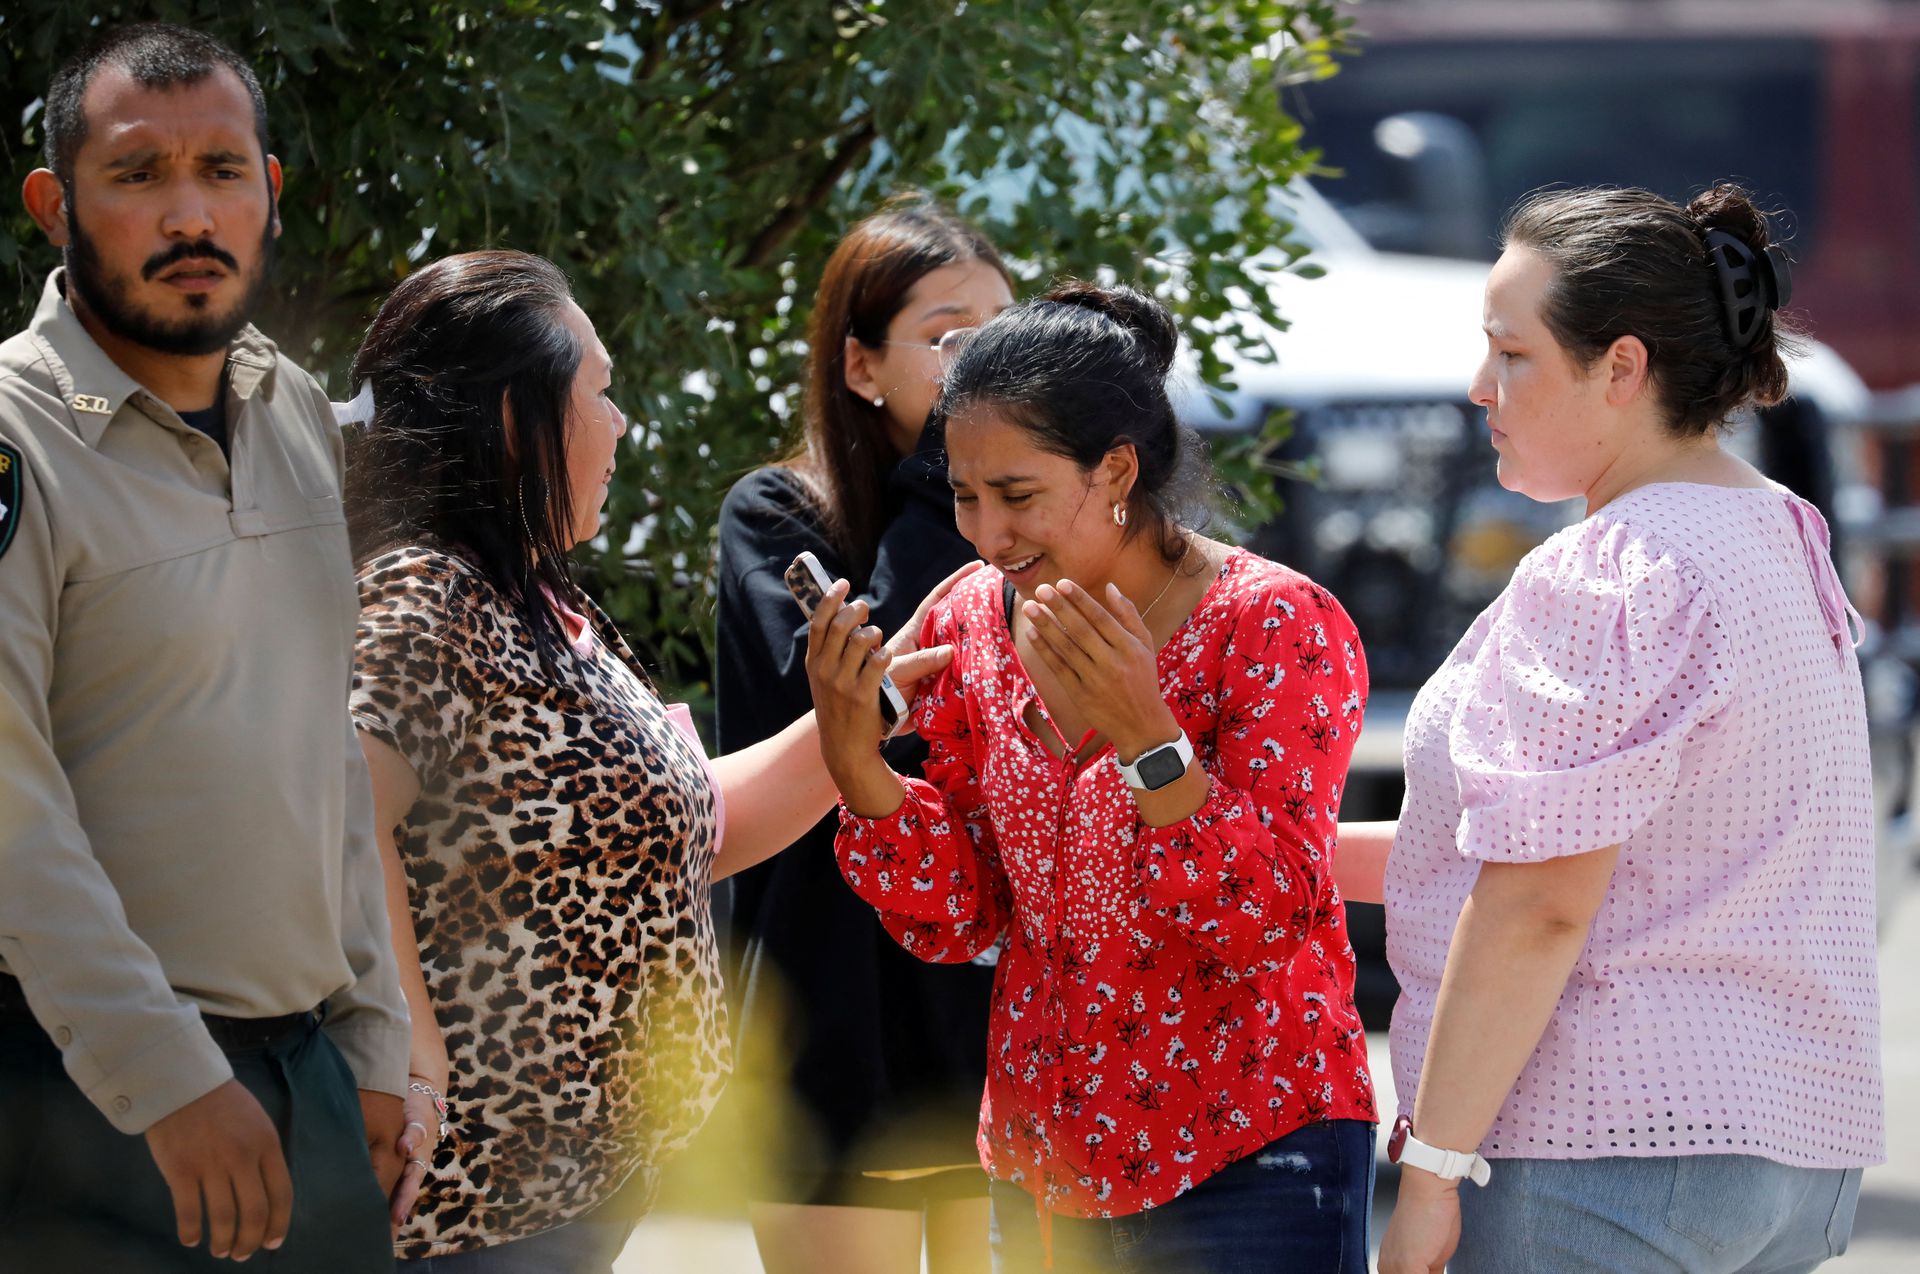 A woman reacts outside the Ssgt Willie de Leon Civic Center, where students had been transported from Robb Elementary School after a shooting in Uvalde, Texas, May 24, 2022. /Reuters